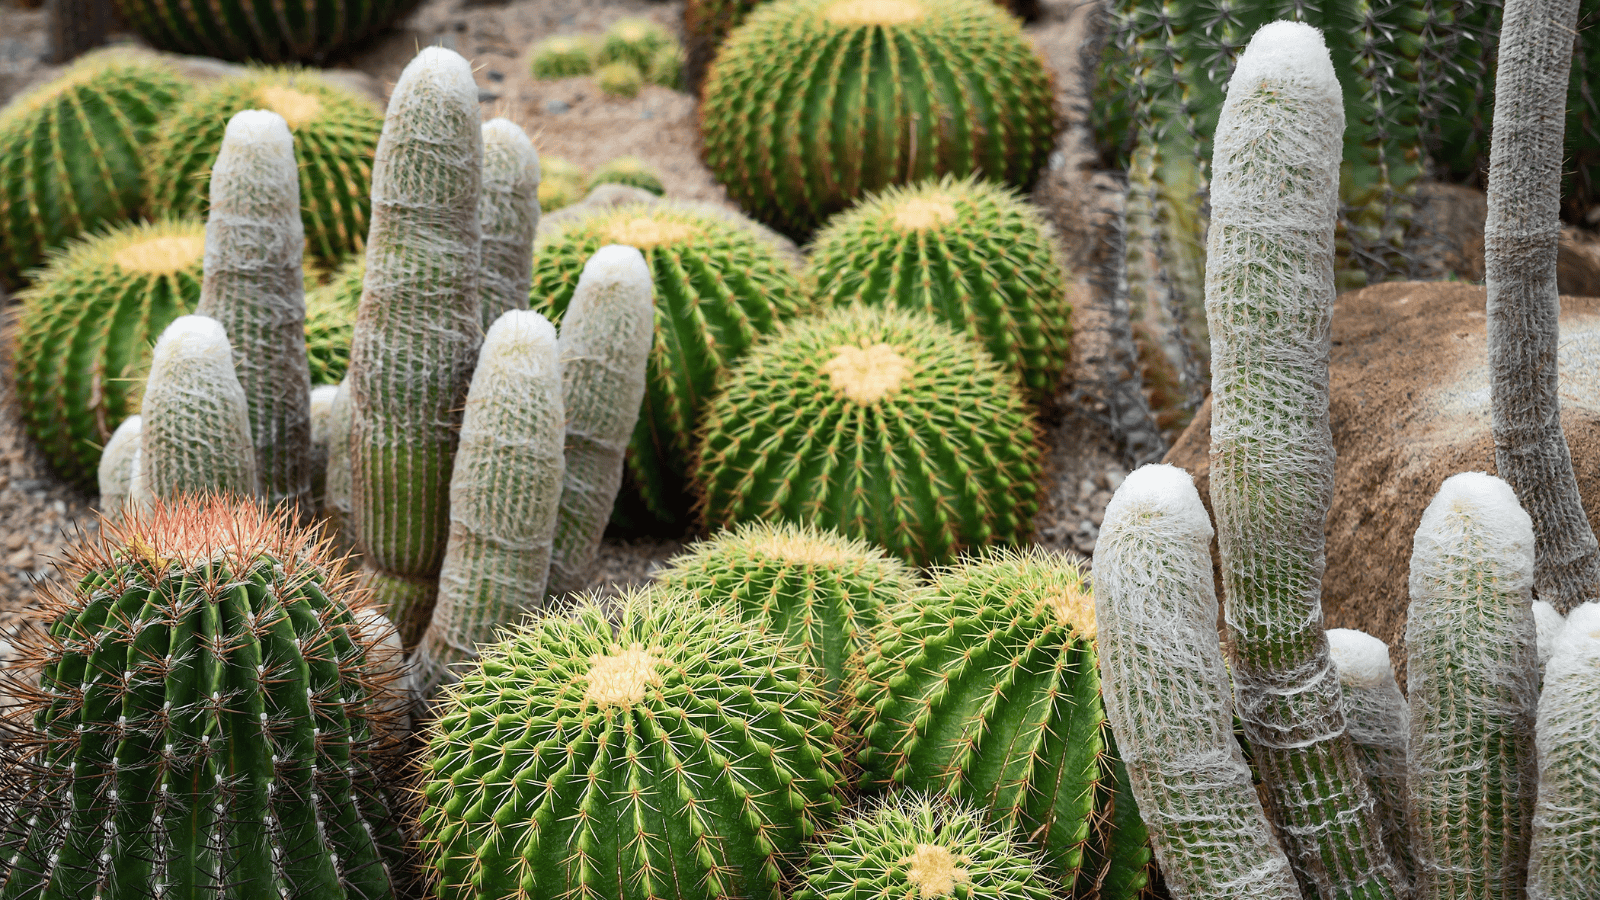 <p>Arizona’s <a href="https://dbg.org/" rel="nofollow external noopener noreferrer">Desert Botanical Garden</a> is perfect for admiring the rugged Sonoran Desert landscape. Since 1939, the garden has been a premier destination for <a href="https://whatthefab.com/hiking-in-phoenix.html" rel="follow">hiking in Phoenix</a>. Guests can observe hundreds of cacti, shrubs, and trees through the walking trails and plant displays.</p>